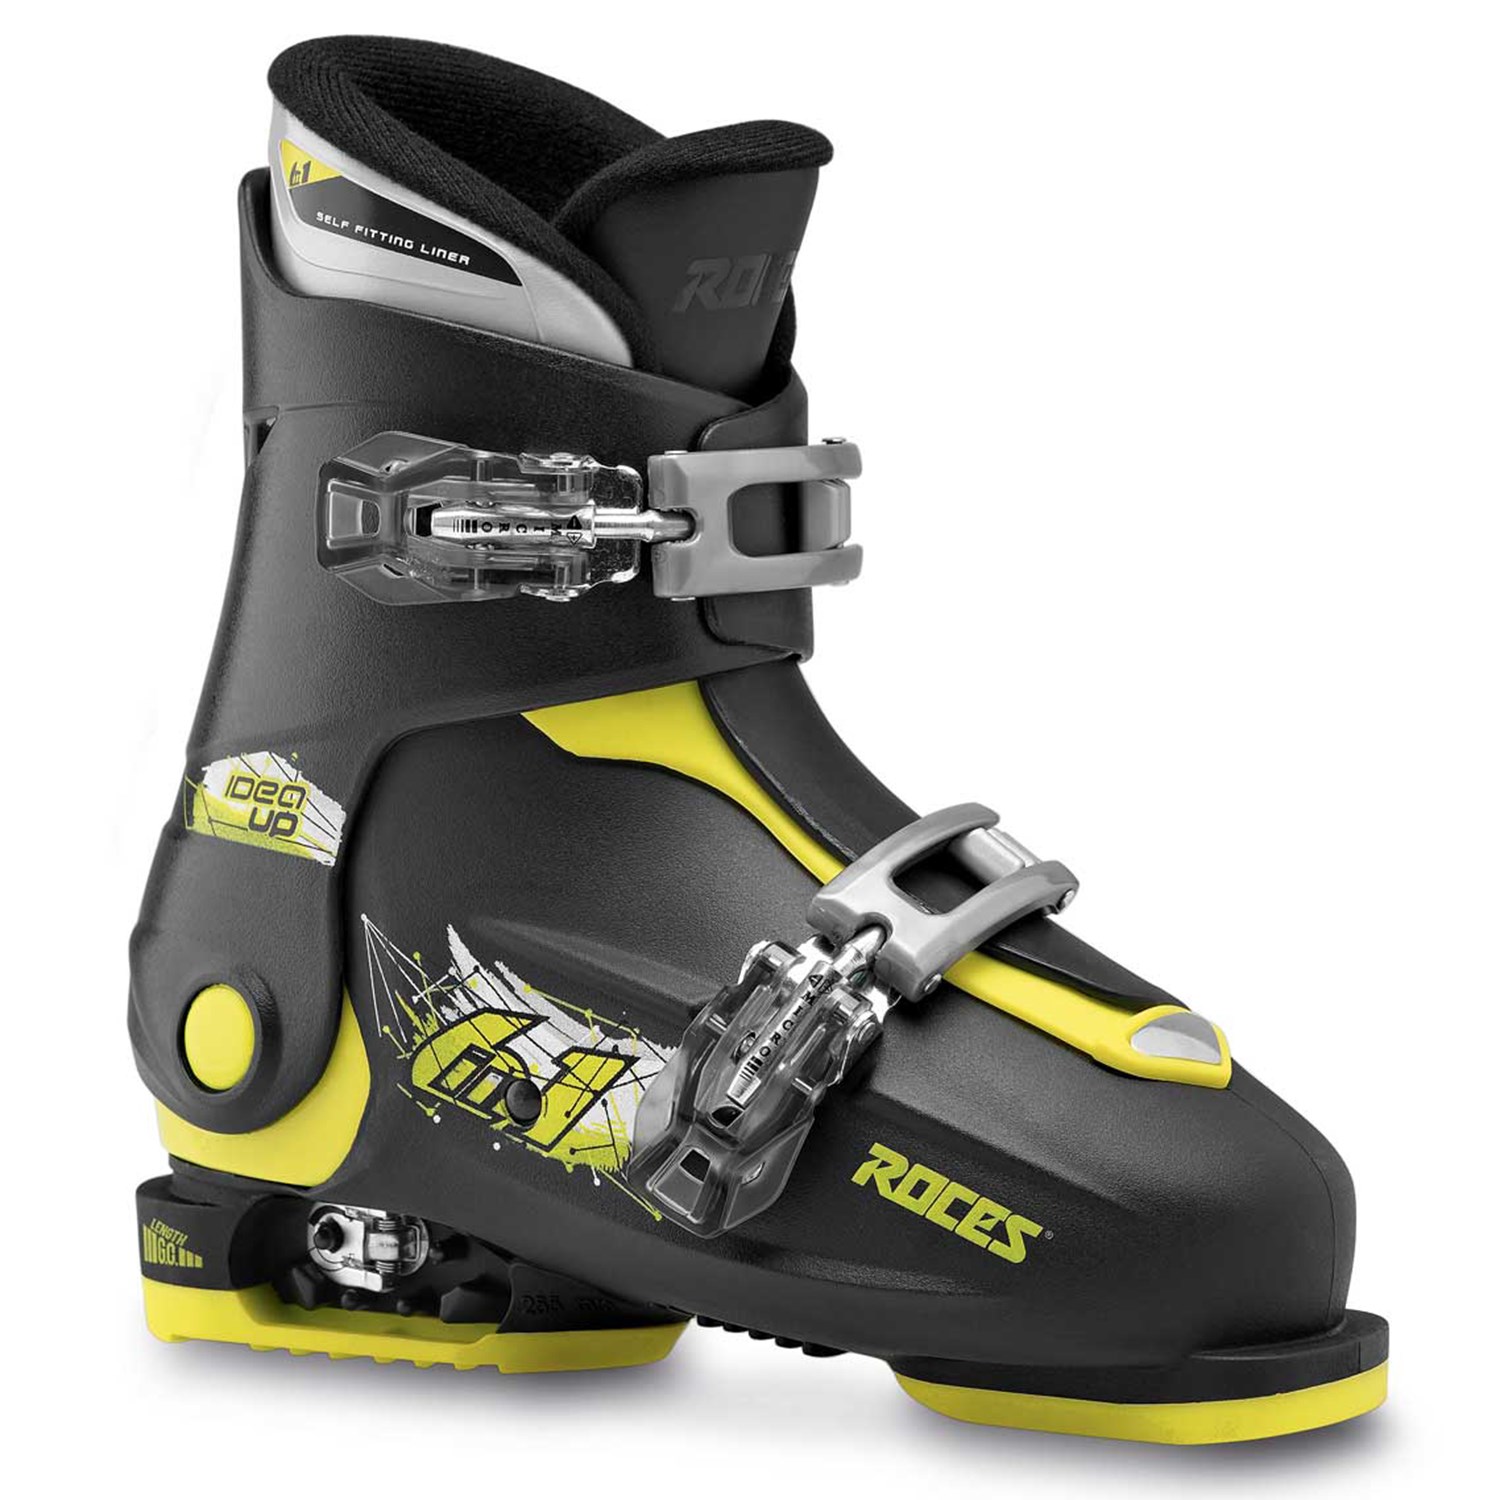 Roces IDEA upFREE 6 in 1 Kids Ski Boots Sizes Adjustable New 